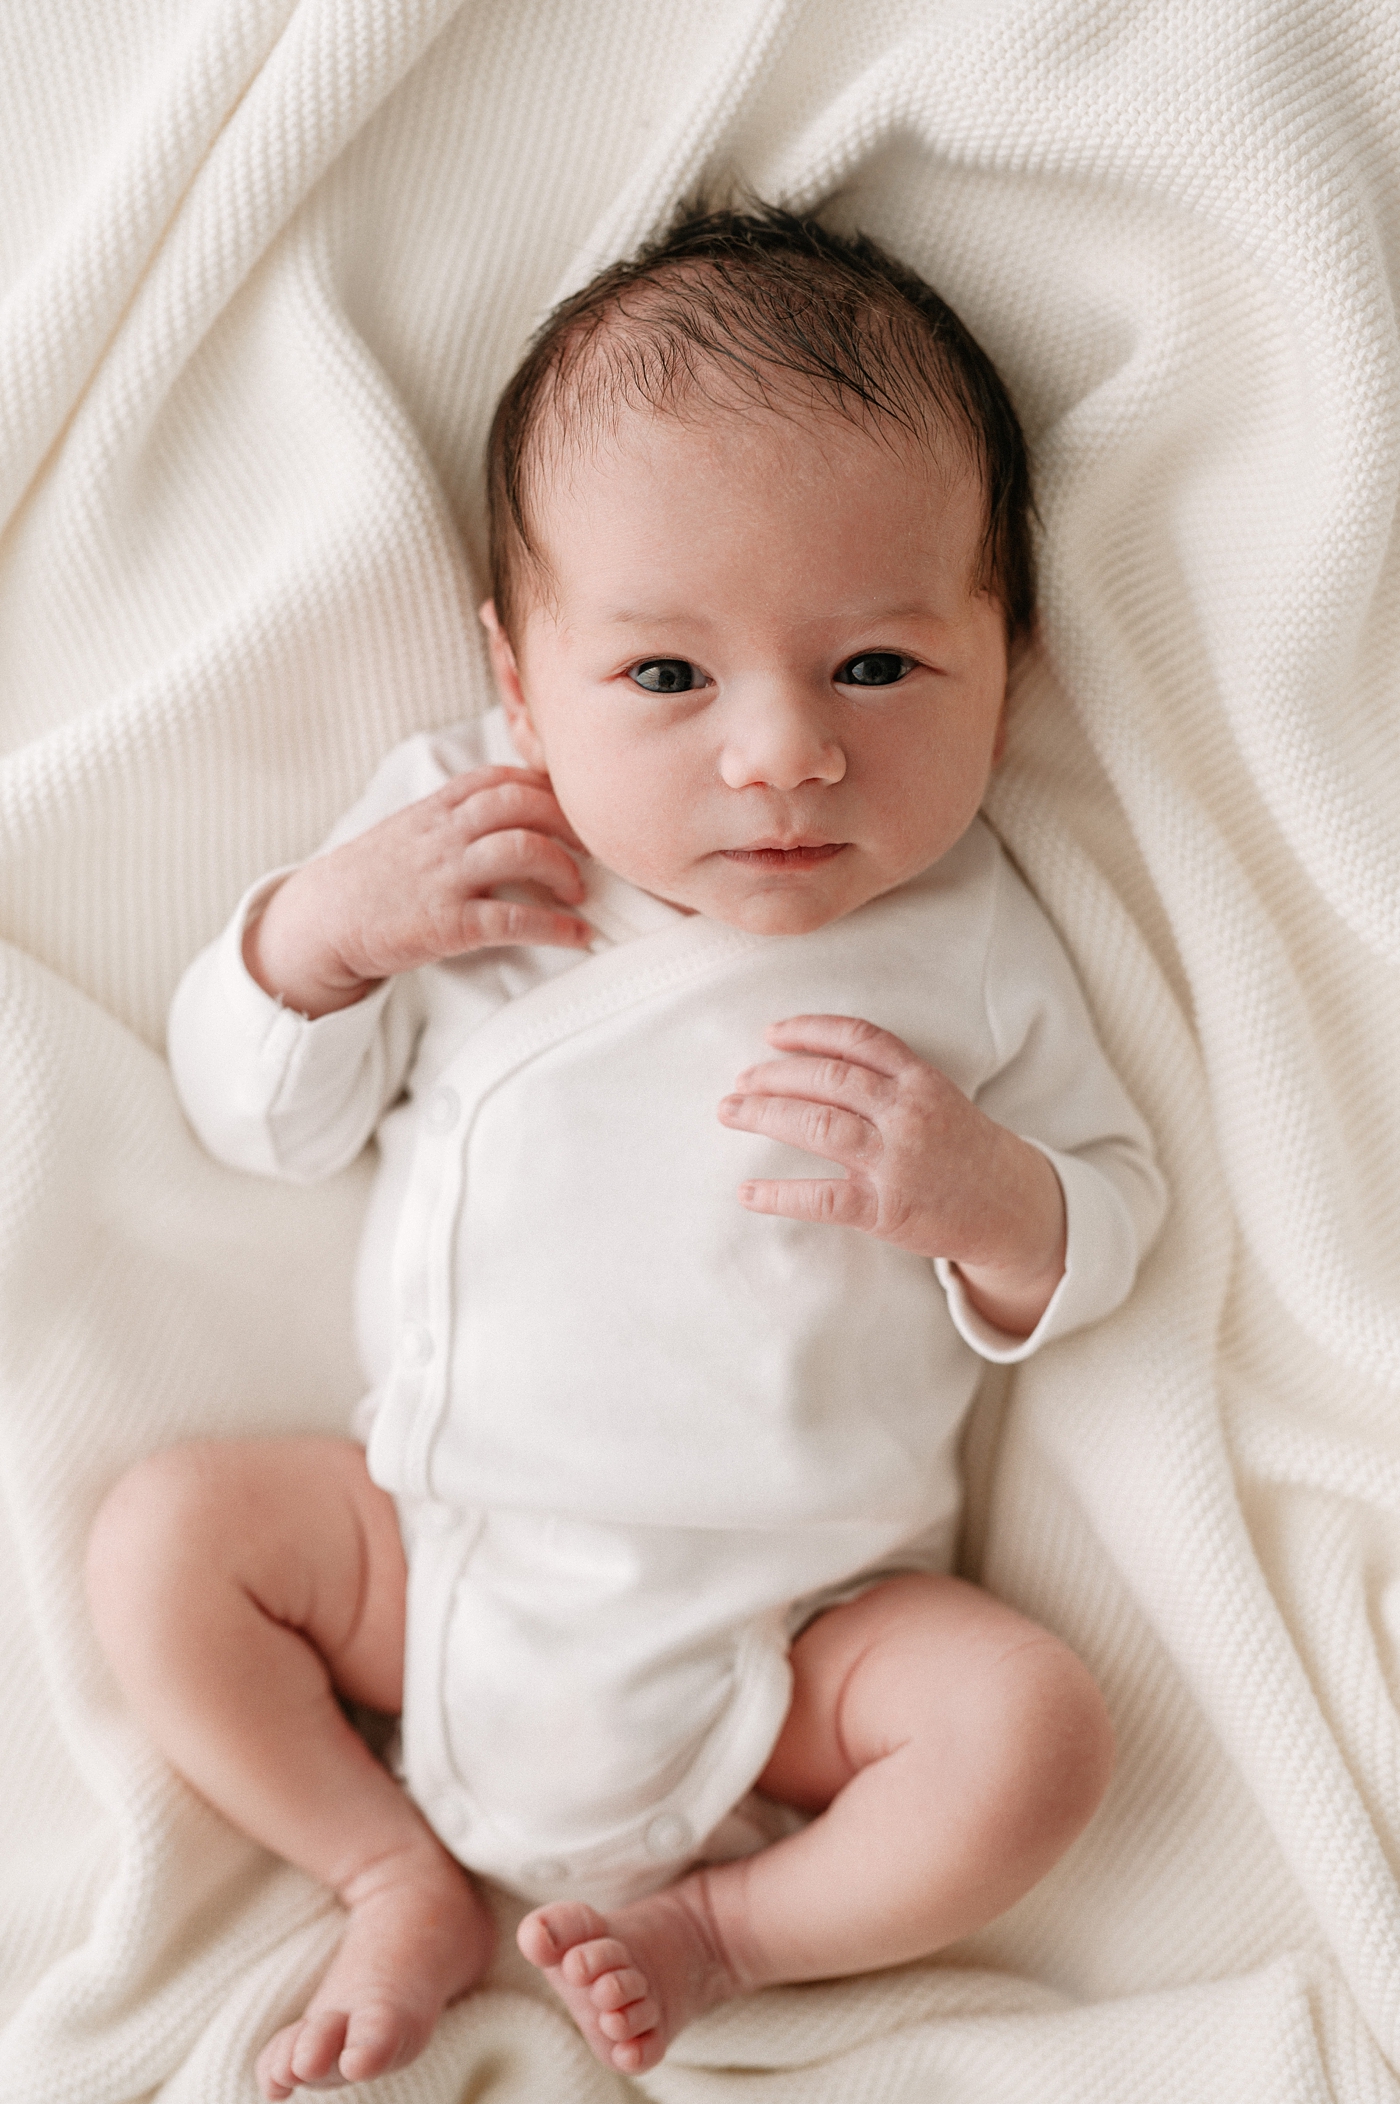 Baby boy stares bright eyed into camera while wearing simple onesie. Photo by Meg Newton Photography.